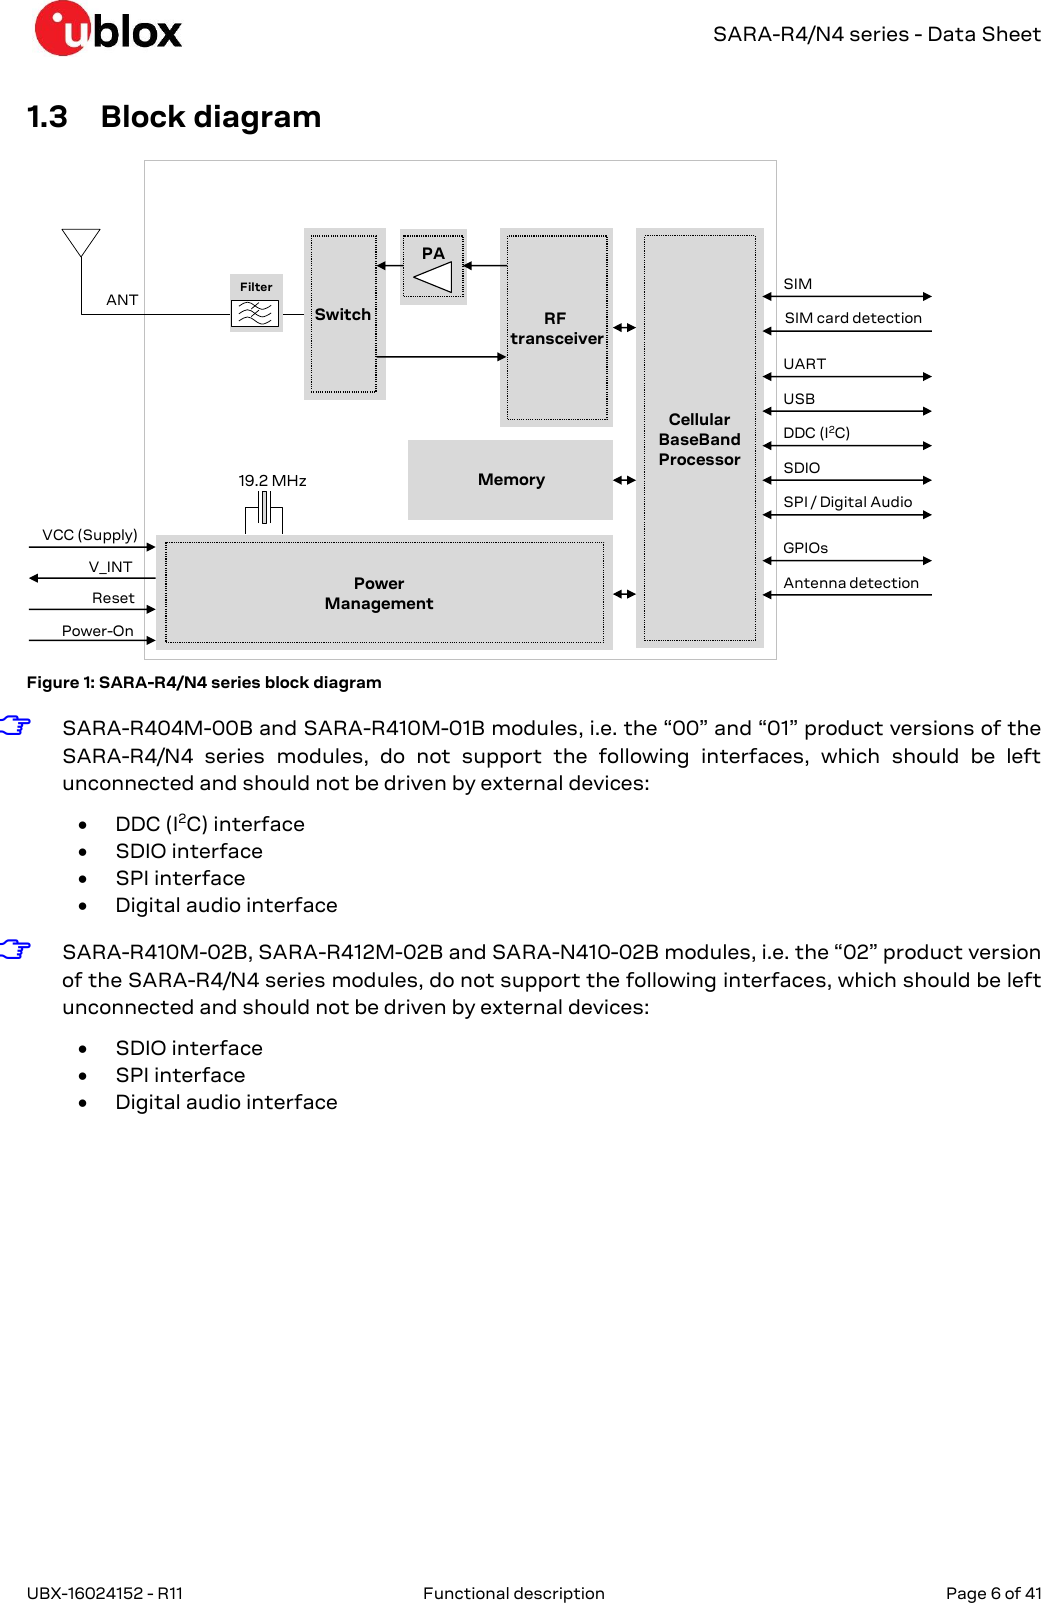   SARA-R4/N4 series - Data Sheet UBX-16024152 - R11  Functional description   Page 6 of 41      1.3 Block diagram MemoryV_INTRF transceiverCellularBaseBandProcessorANTVCC (Supply)USBDDC (I2C)SIM card detectionSIMUARTPower-OnResetGPIOsAntenna detectionSwitchPA19.2 MHzPowerManagementFilterSDIOSPI / Digital Audio Figure 1: SARA-R4/N4 series block diagram ☞ SARA-R404M-00B and SARA-R410M-01B modules, i.e. the “00” and “01” product versions of the SARA-R4/N4  series  modules,  do  not  support  the  following  interfaces,  which  should  be  left unconnected and should not be driven by external devices:  DDC (I2C) interface  SDIO interface  SPI interface  Digital audio interface ☞ SARA-R410M-02B, SARA-R412M-02B and SARA-N410-02B modules, i.e. the “02” product version of the SARA-R4/N4 series modules, do not support the following interfaces, which should be left unconnected and should not be driven by external devices:  SDIO interface  SPI interface  Digital audio interface 